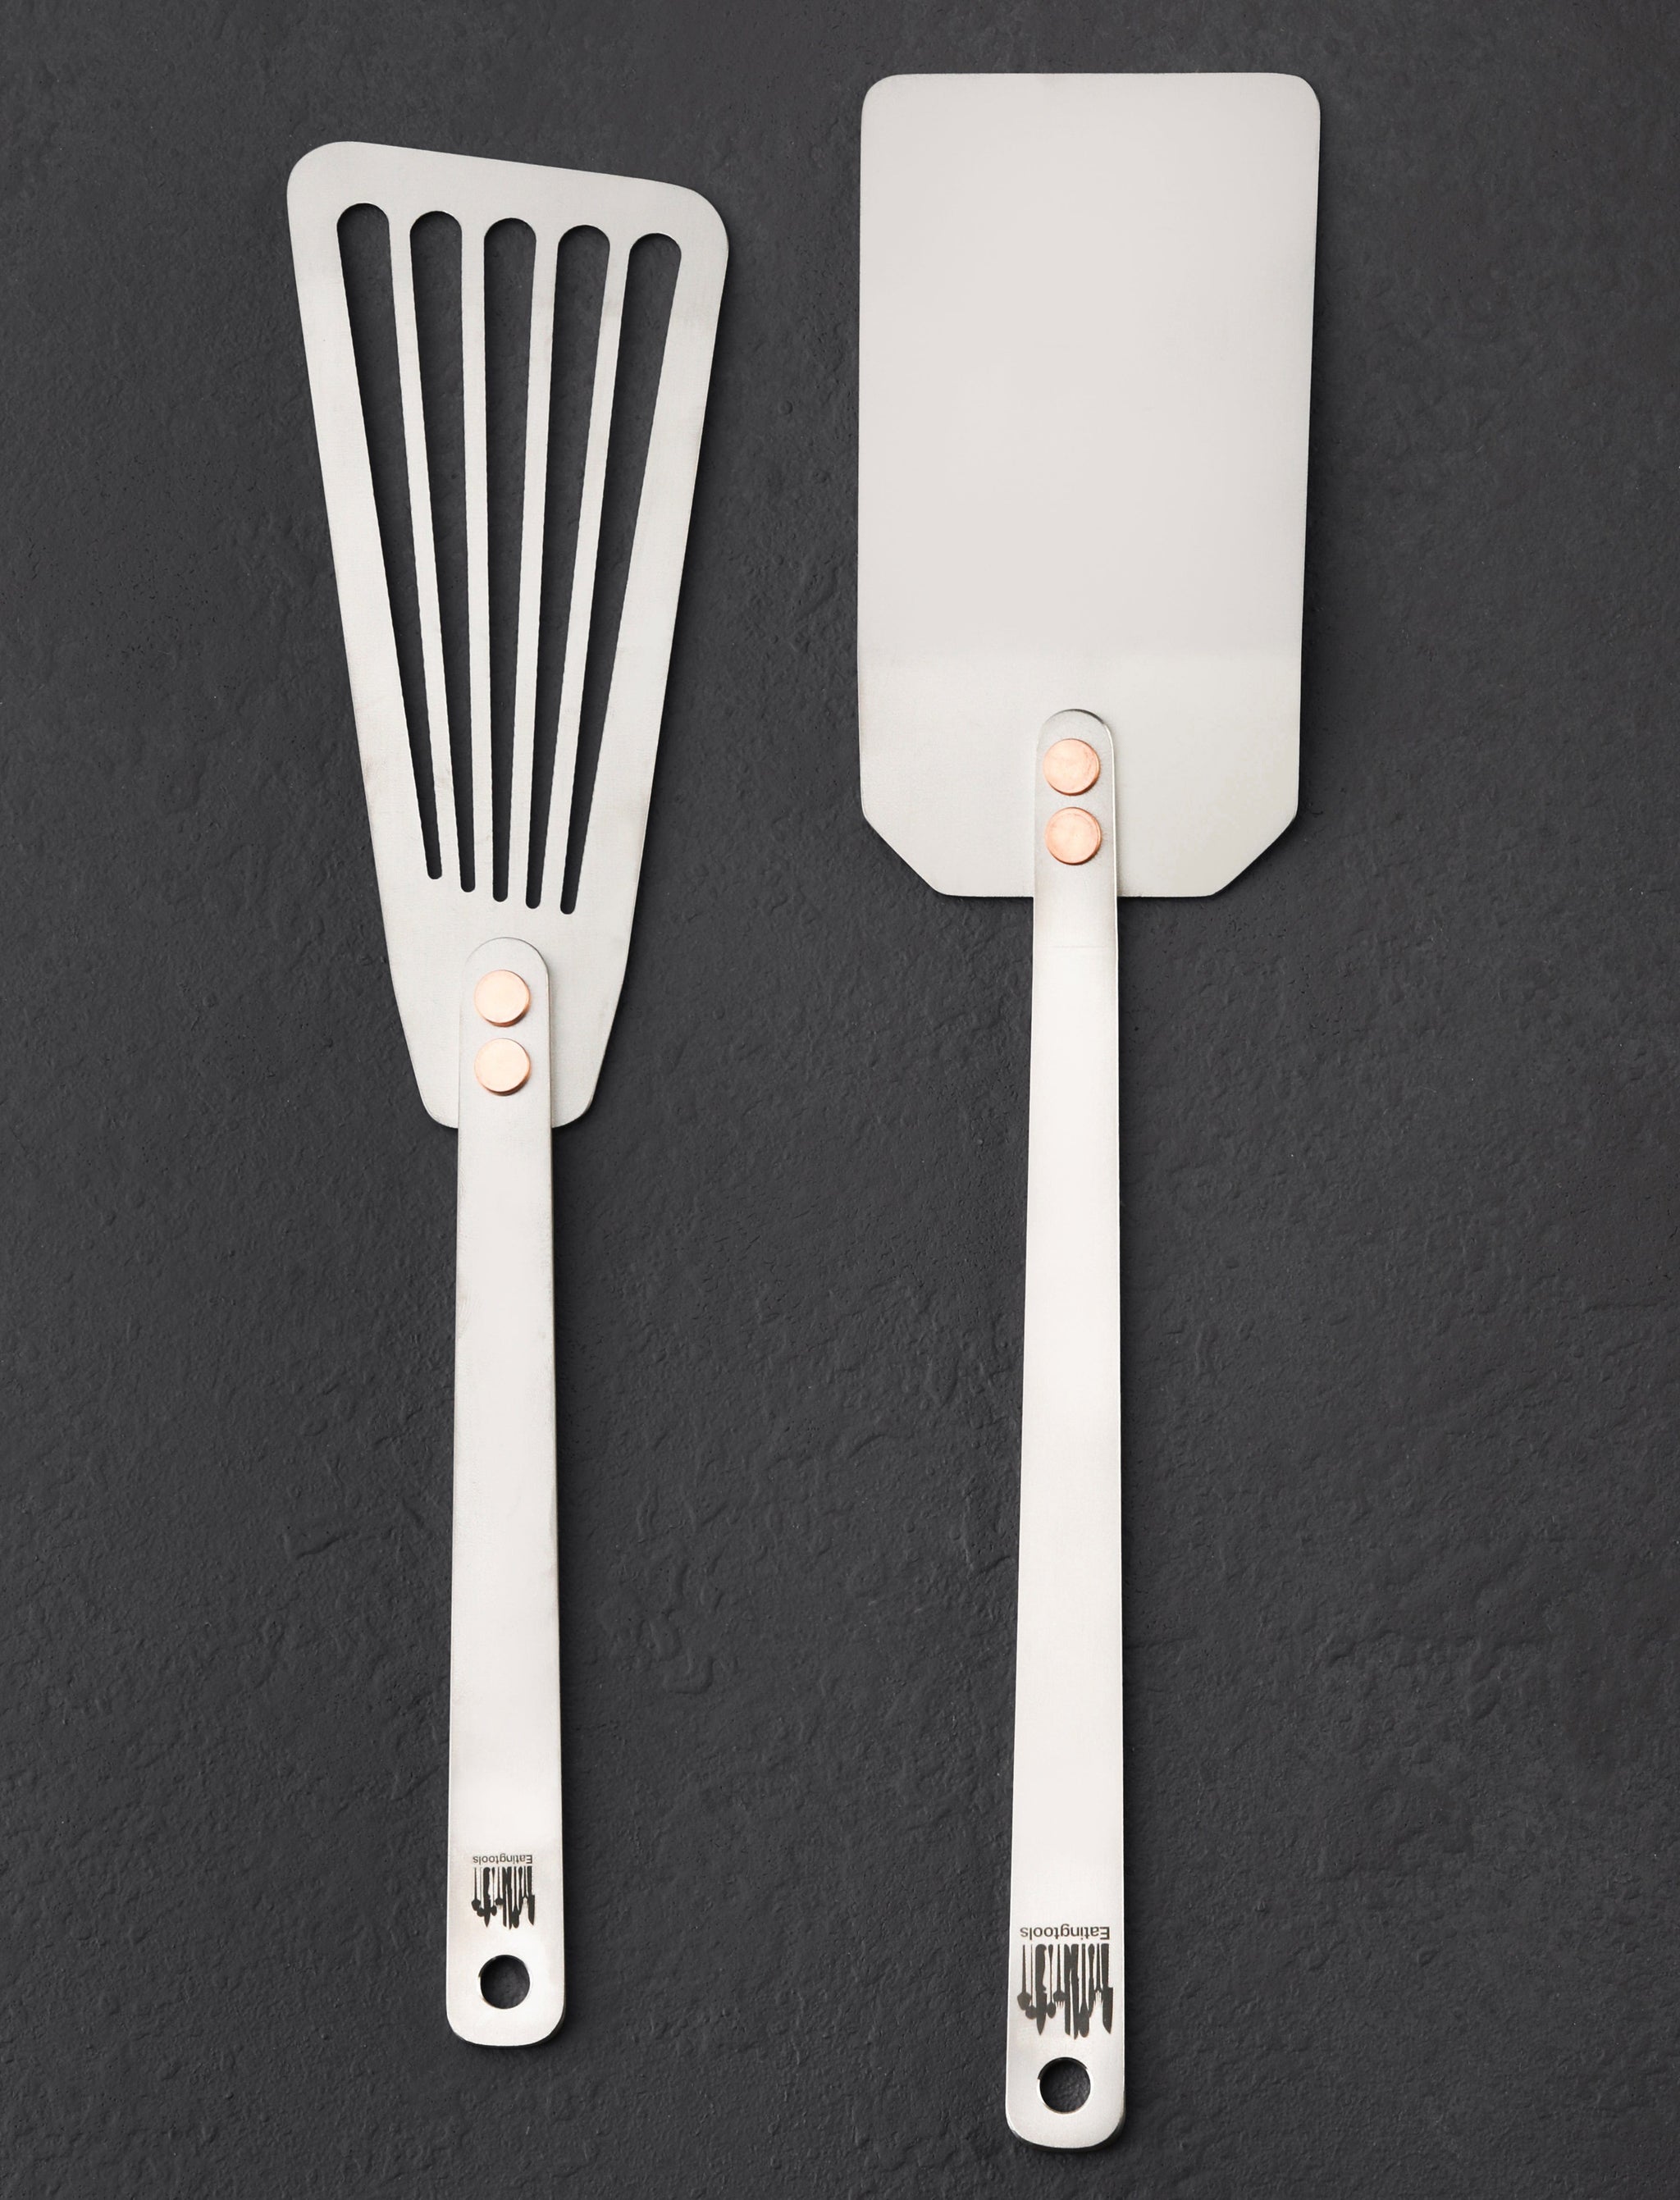 How To Choose The Best Spatula - The Perfect Spatulas For Every Job